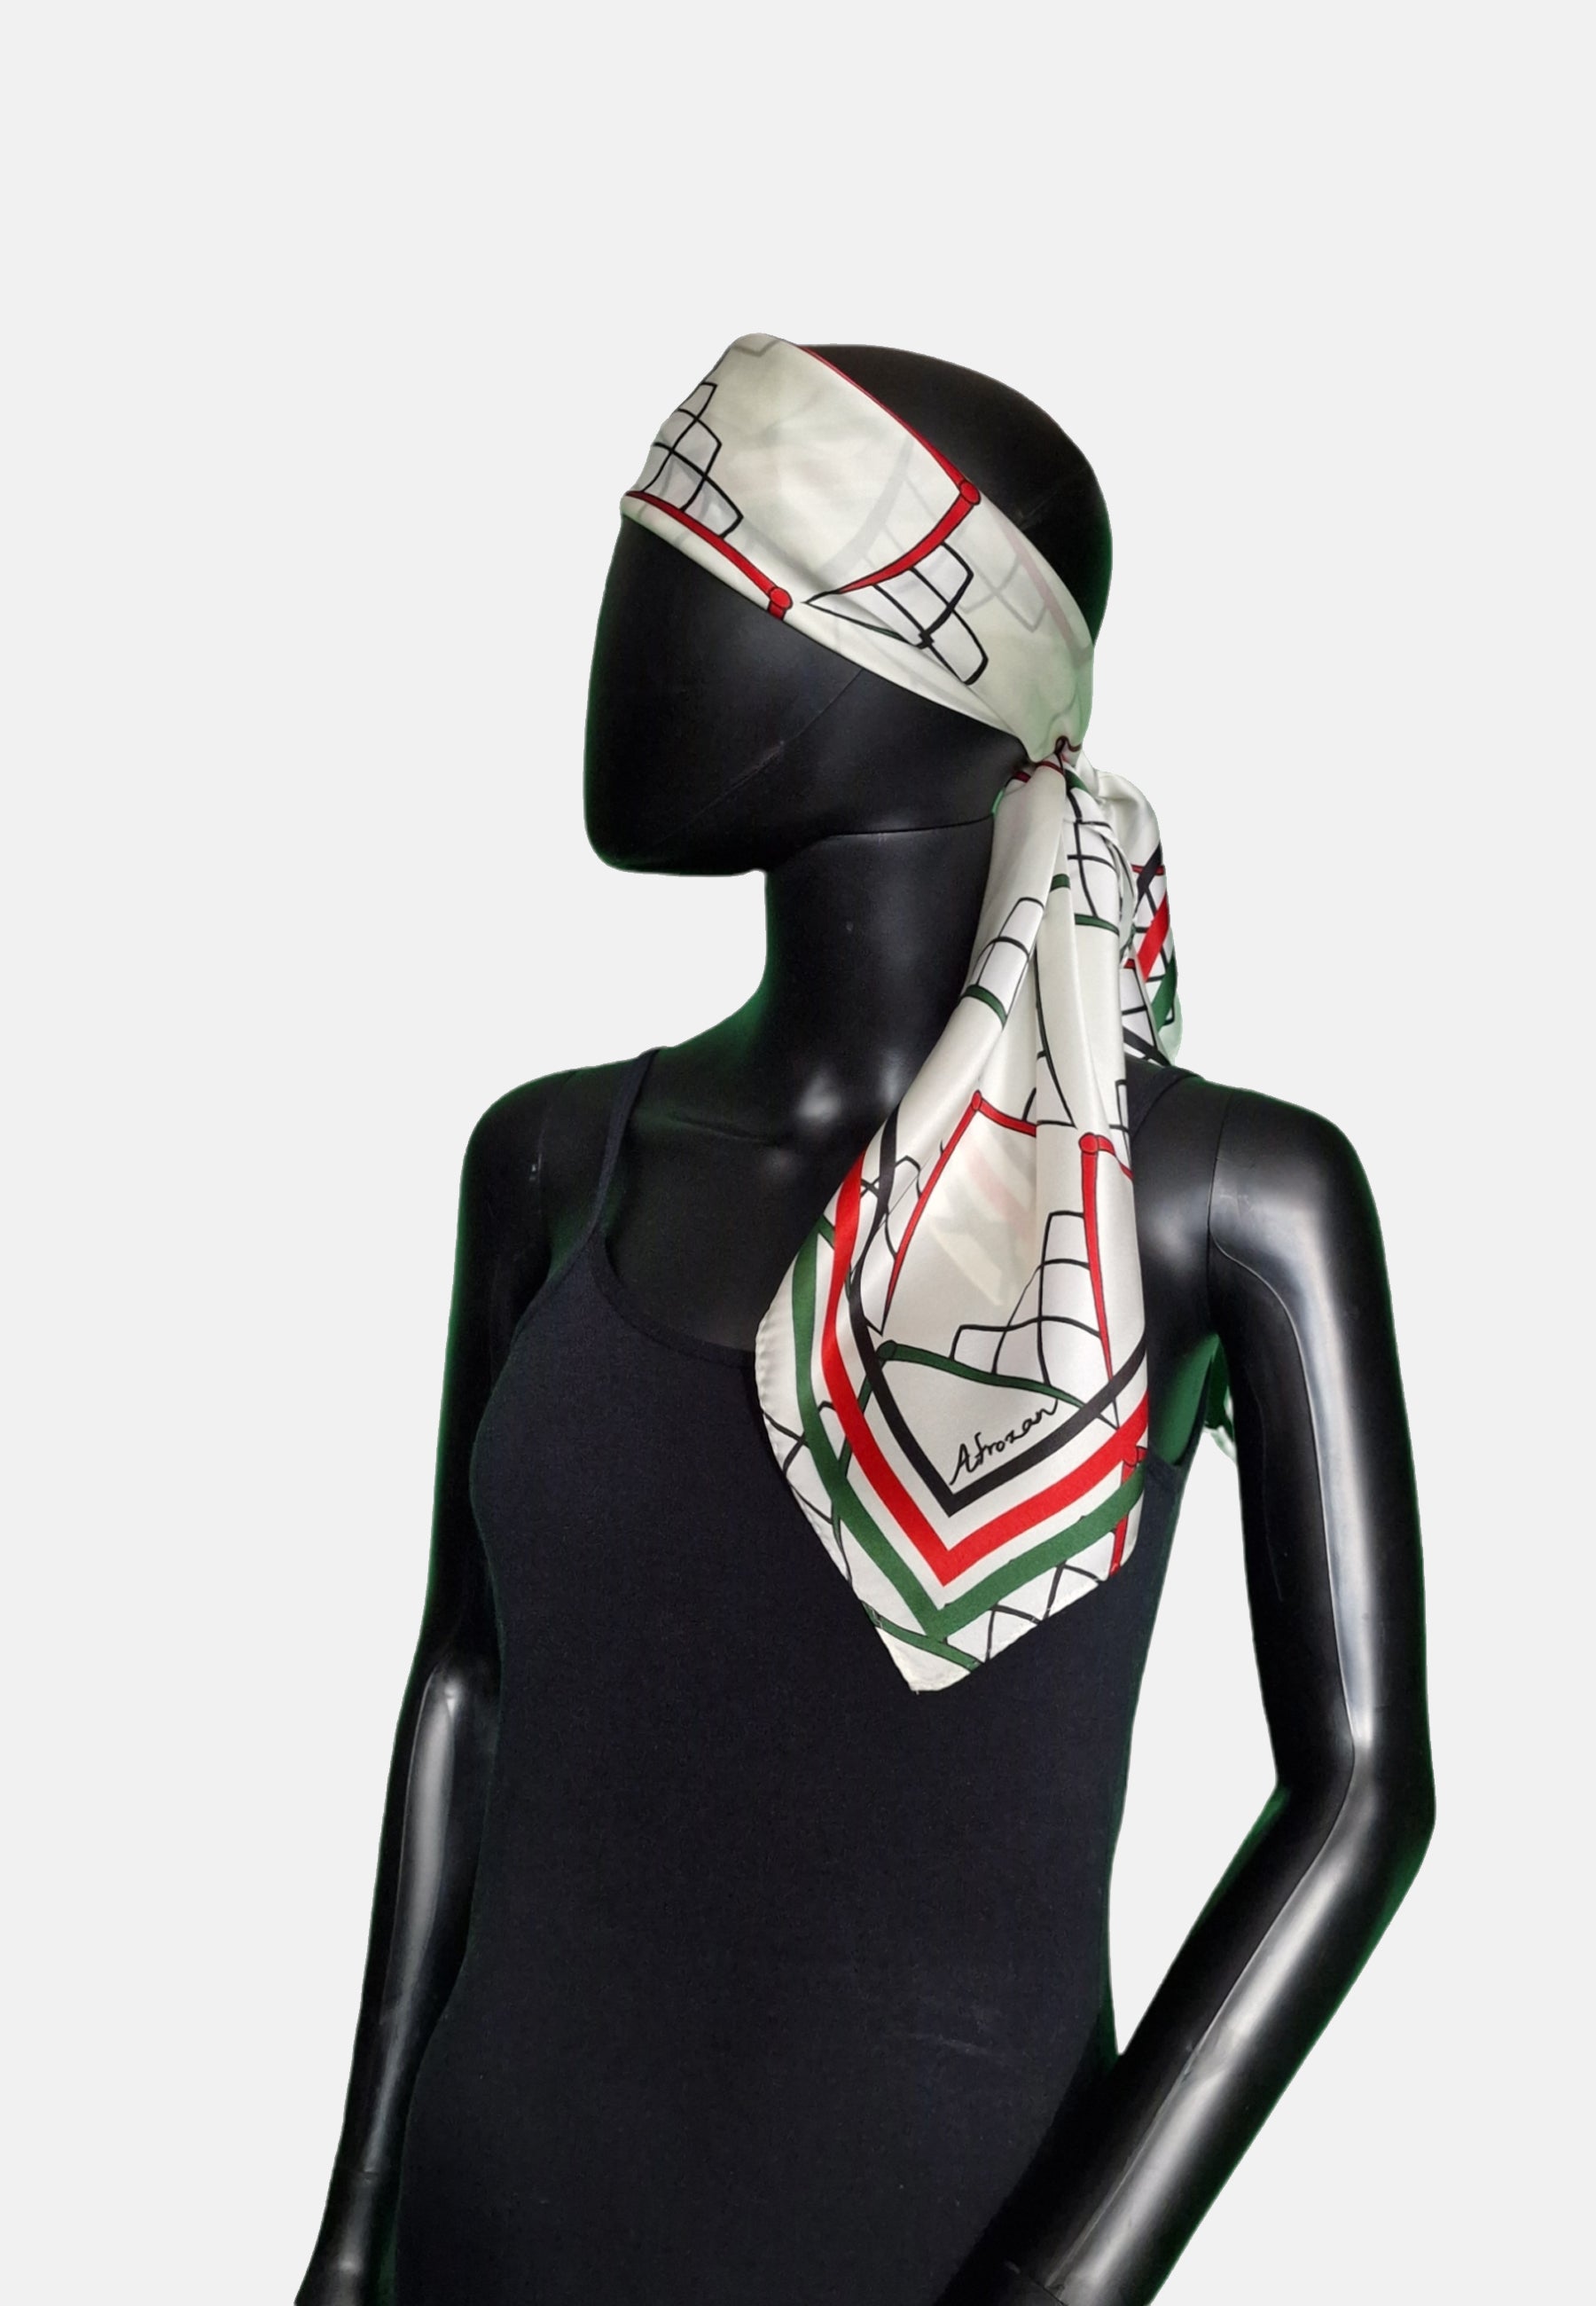 Silk Scarf - Made in Italy - Sustainable fashion - Mode sostenibile made in Italy -Sciarpa seta 